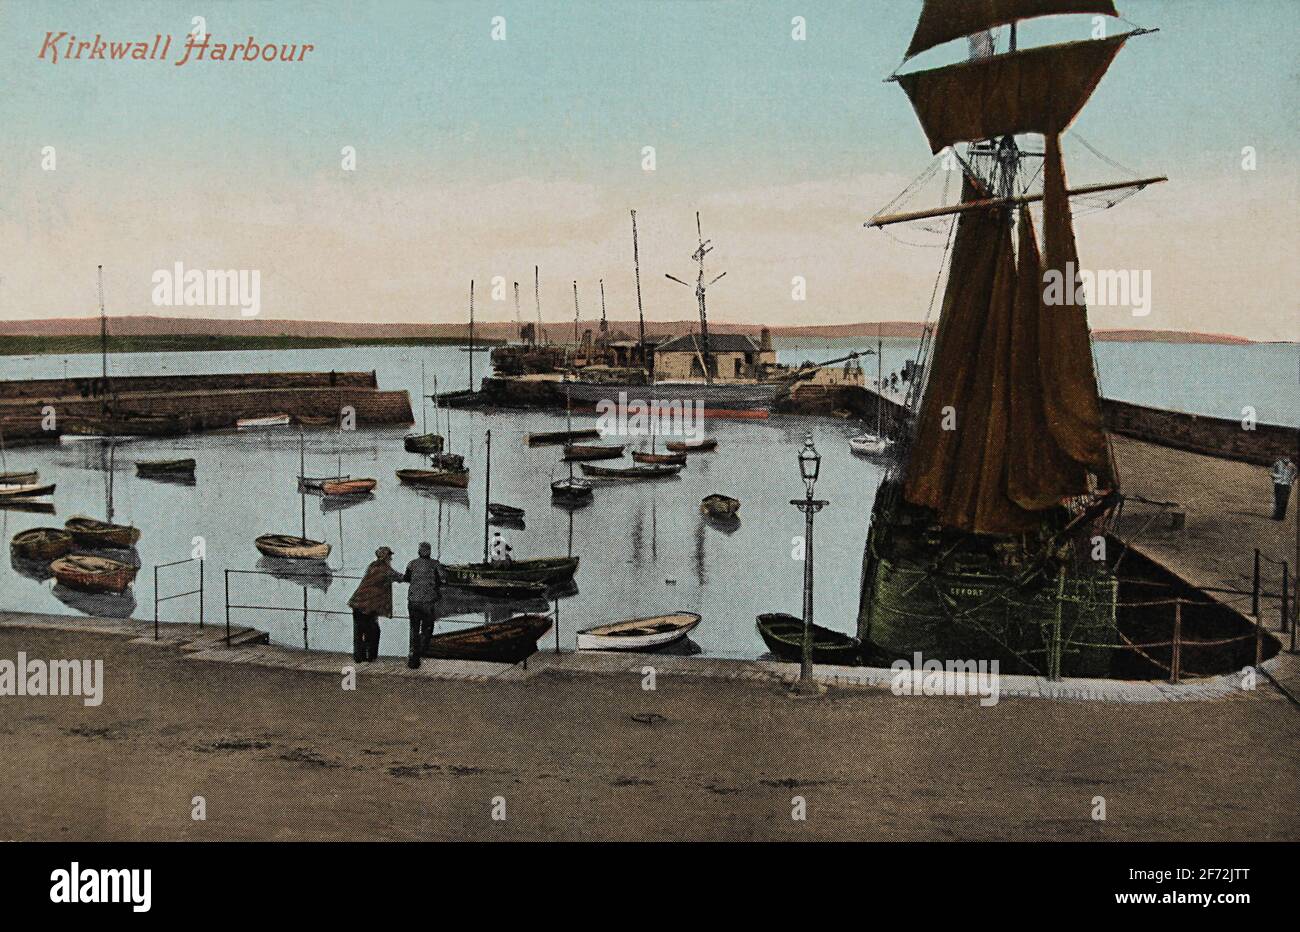 Postcard postmarked 1908 showing Kirkwall Harbour, Orkney Islands Stock Photo